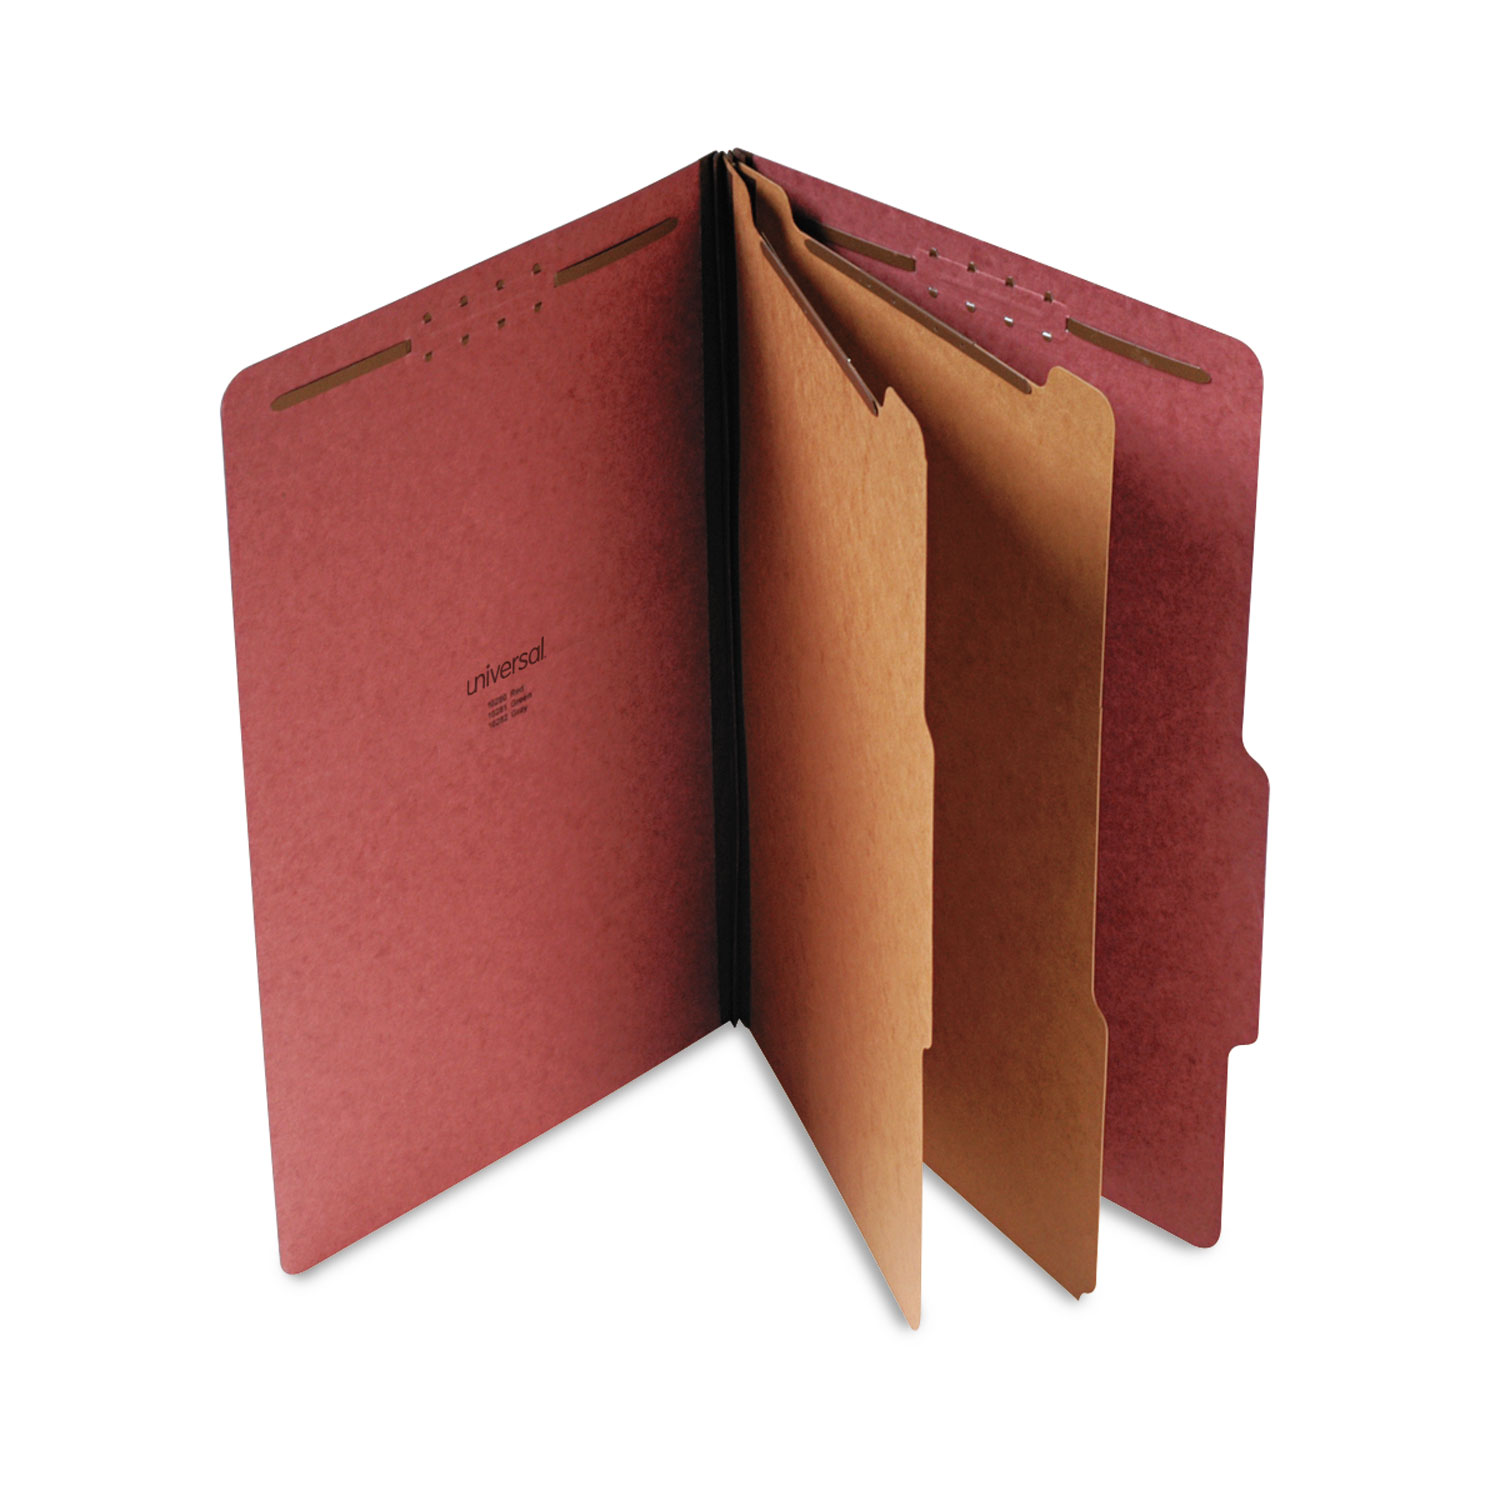 Six--Section Pressboard Classification Folders, 2 Dividers, Legal Size, Red, 10/Box